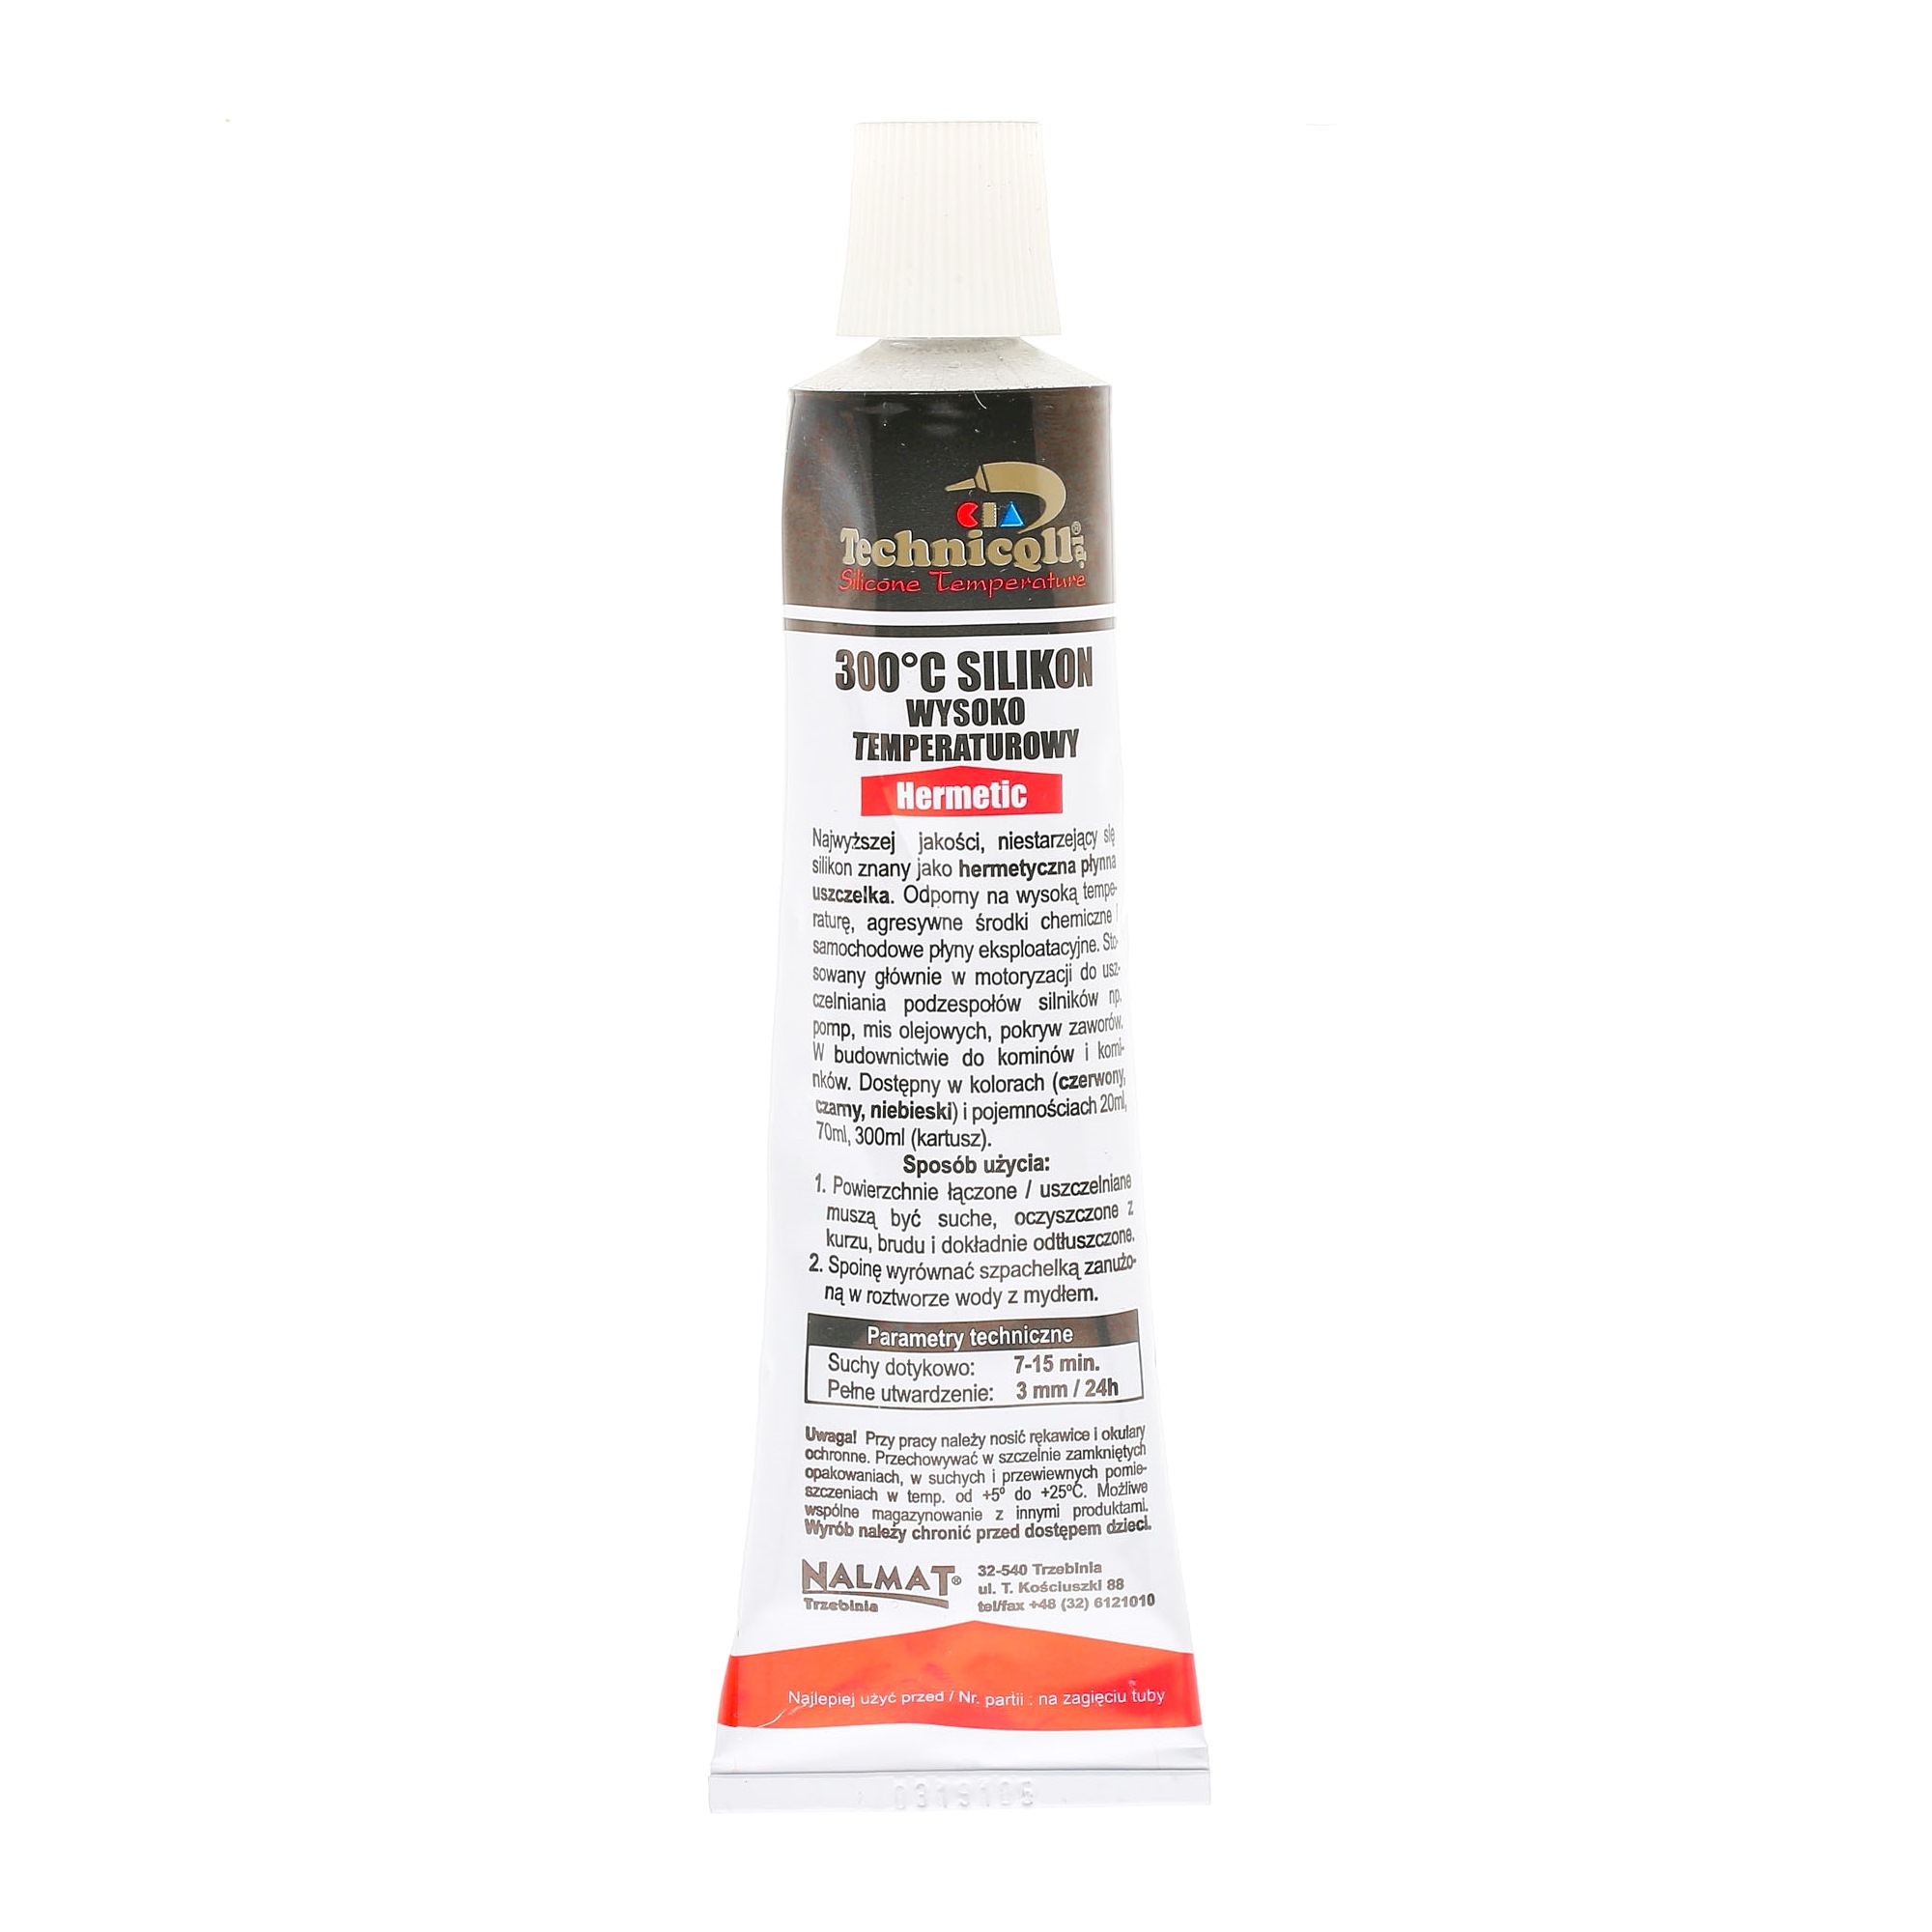 TECHNICQLL Capacity: 70ml, Contains silicate, Heat-resistant, red Sealing Substance S-280 buy